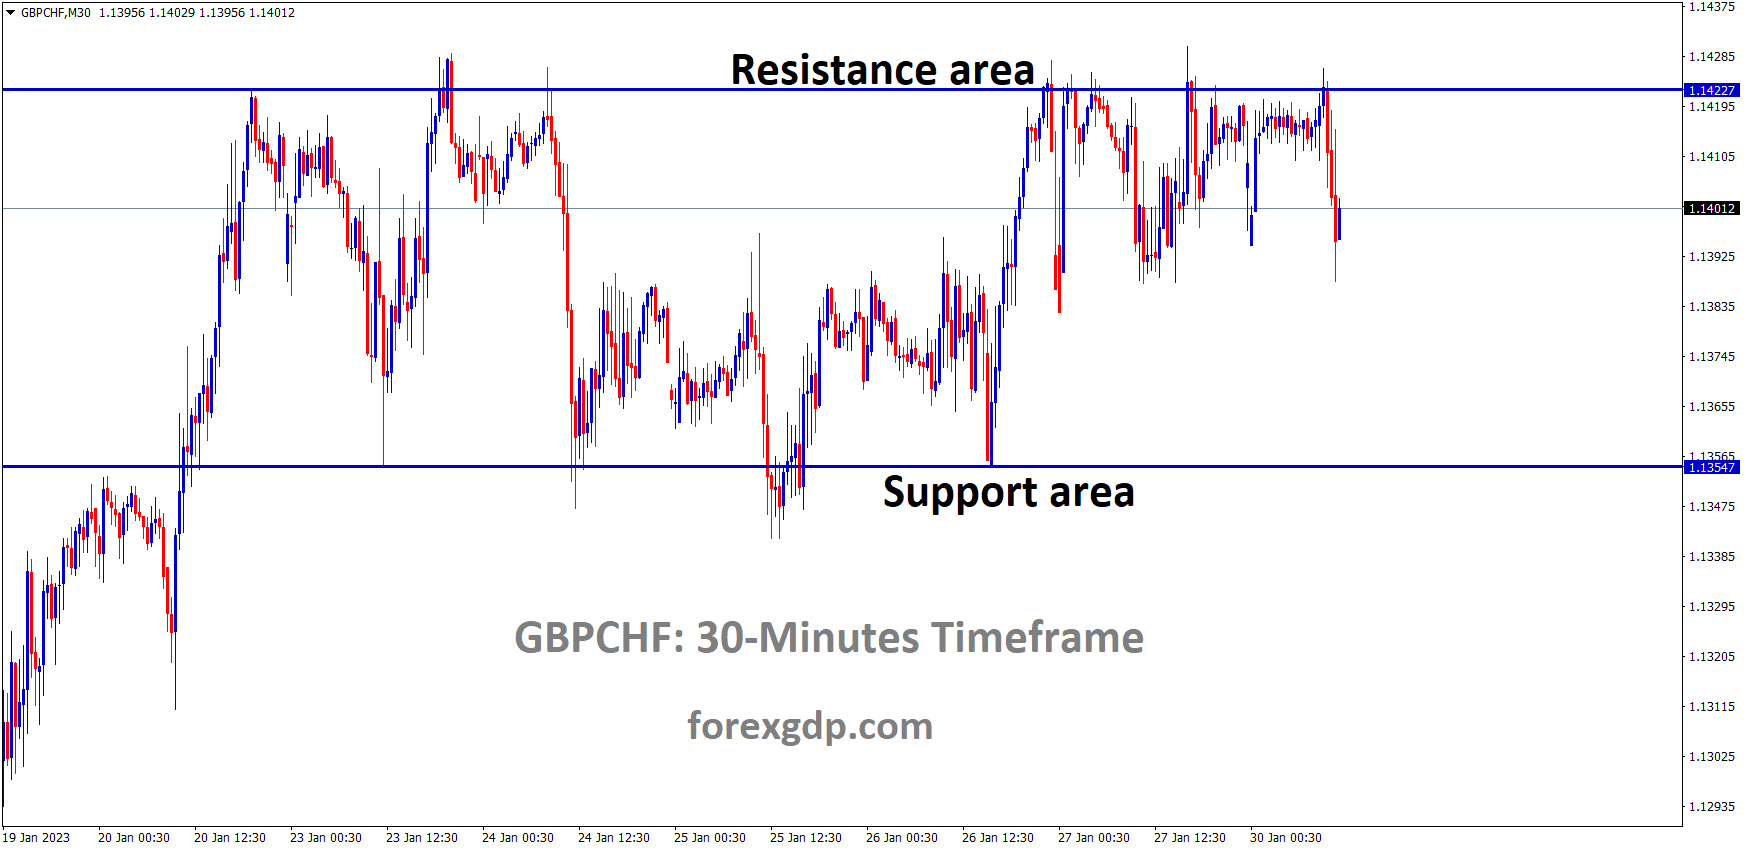 GBPCHF is moving in the Box pattern and the market has fallen from the resistance area of the pattern